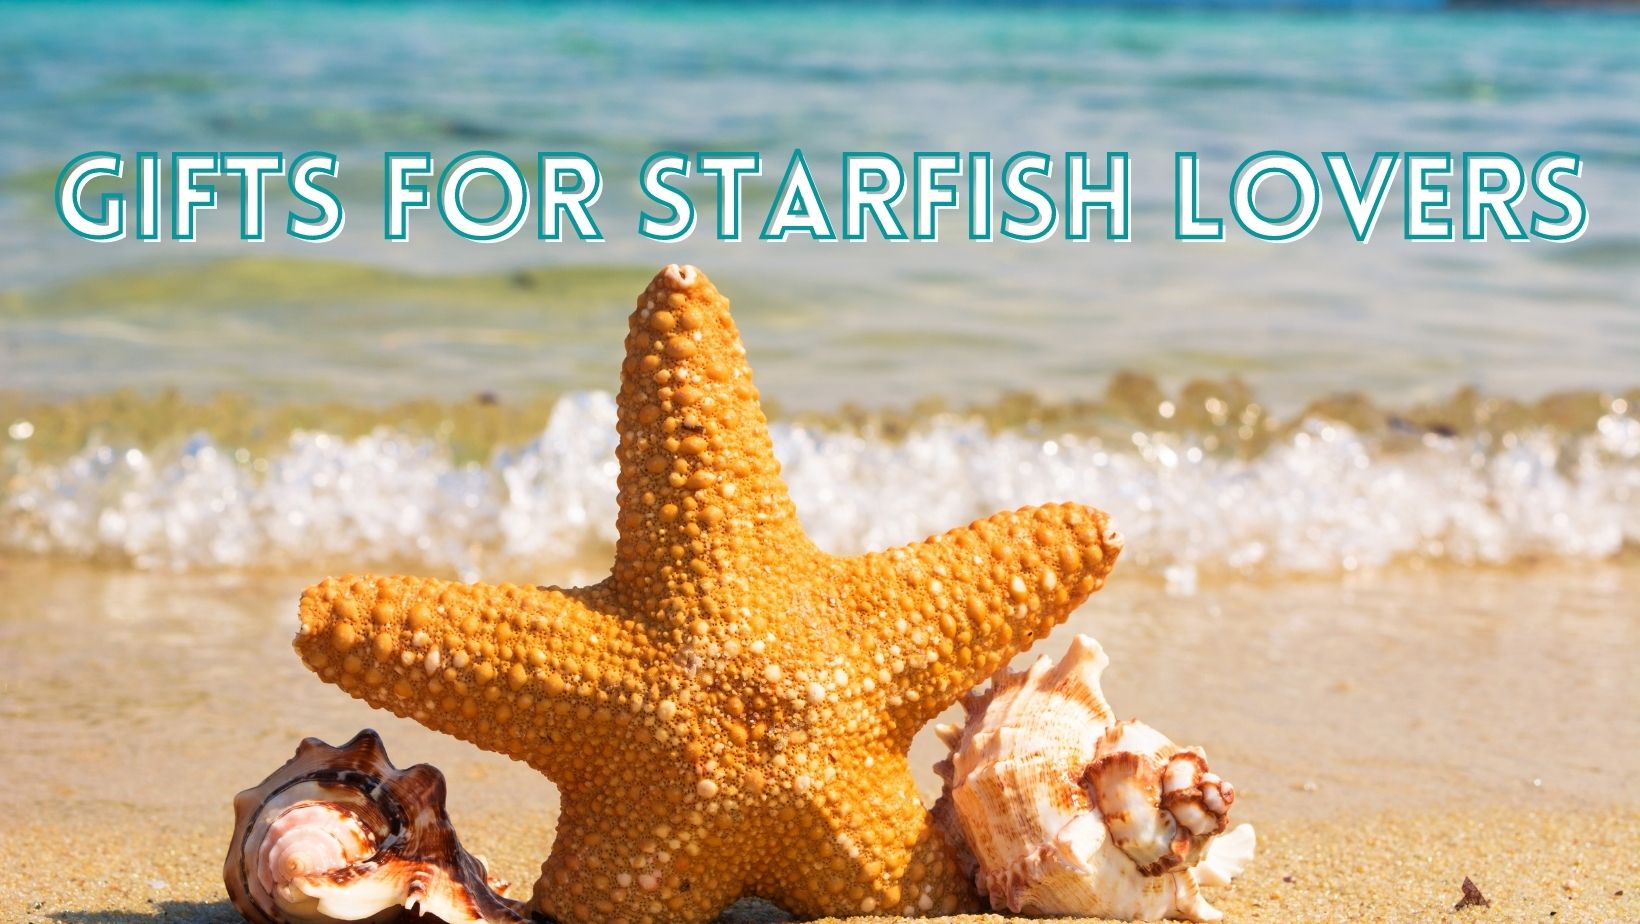 Gifts perfect for starfish lovers